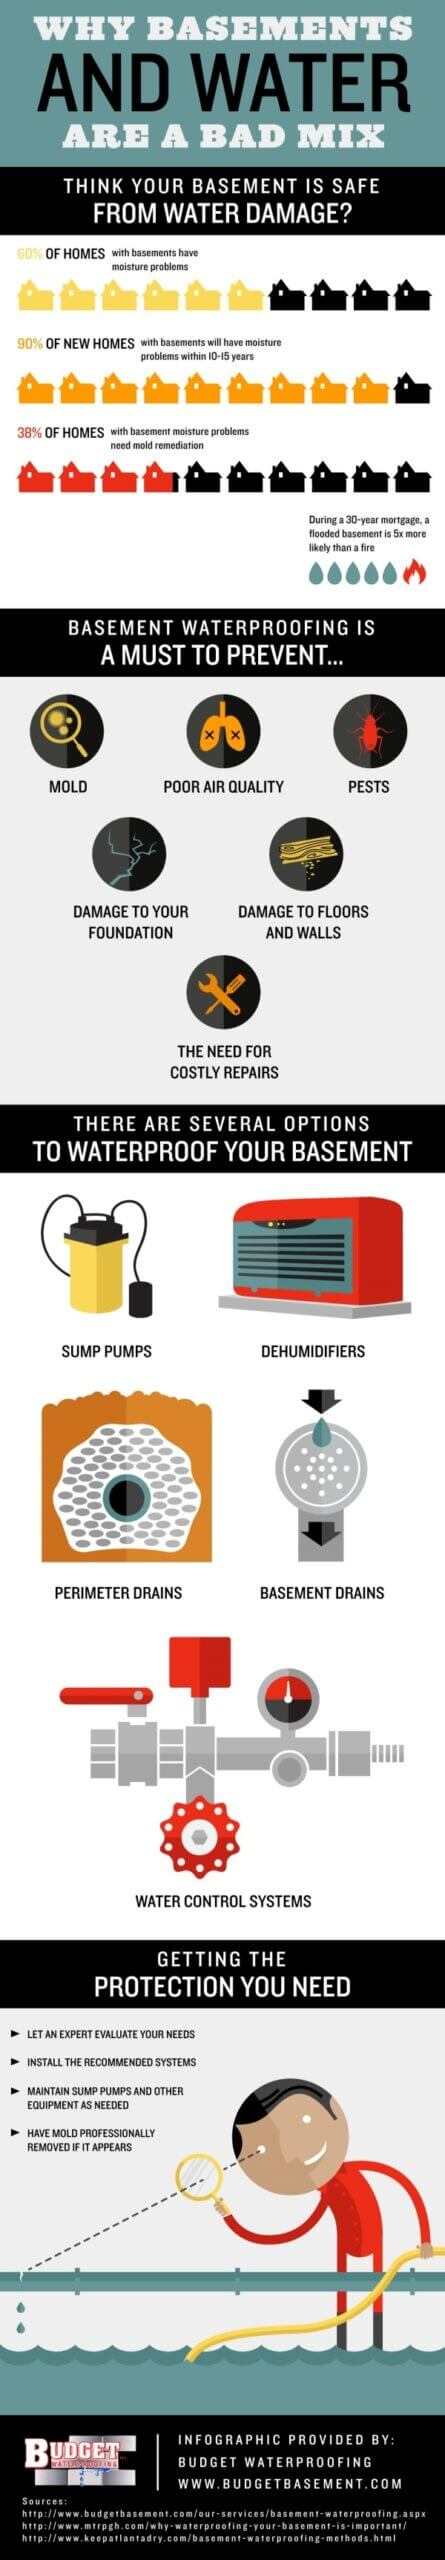 Why Basements And Water Are A Bad Mix Infographic scaled